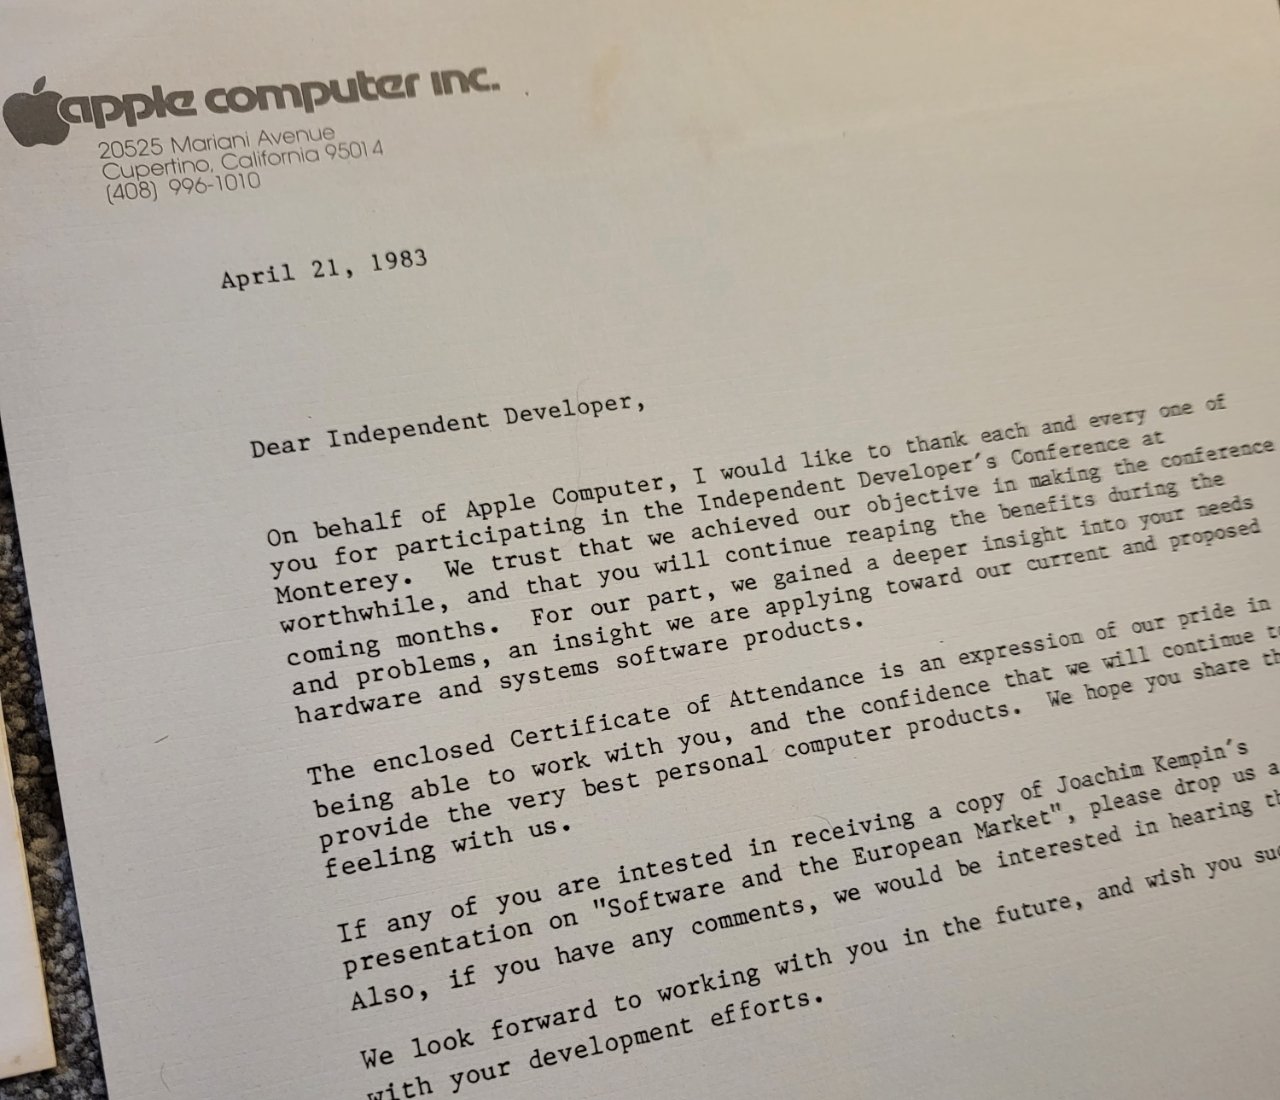 A photo of an old letter from Apple Computer Inc. dated April 21, 1983, addressing an independent developer and expressing gratitude for participation in a conference.